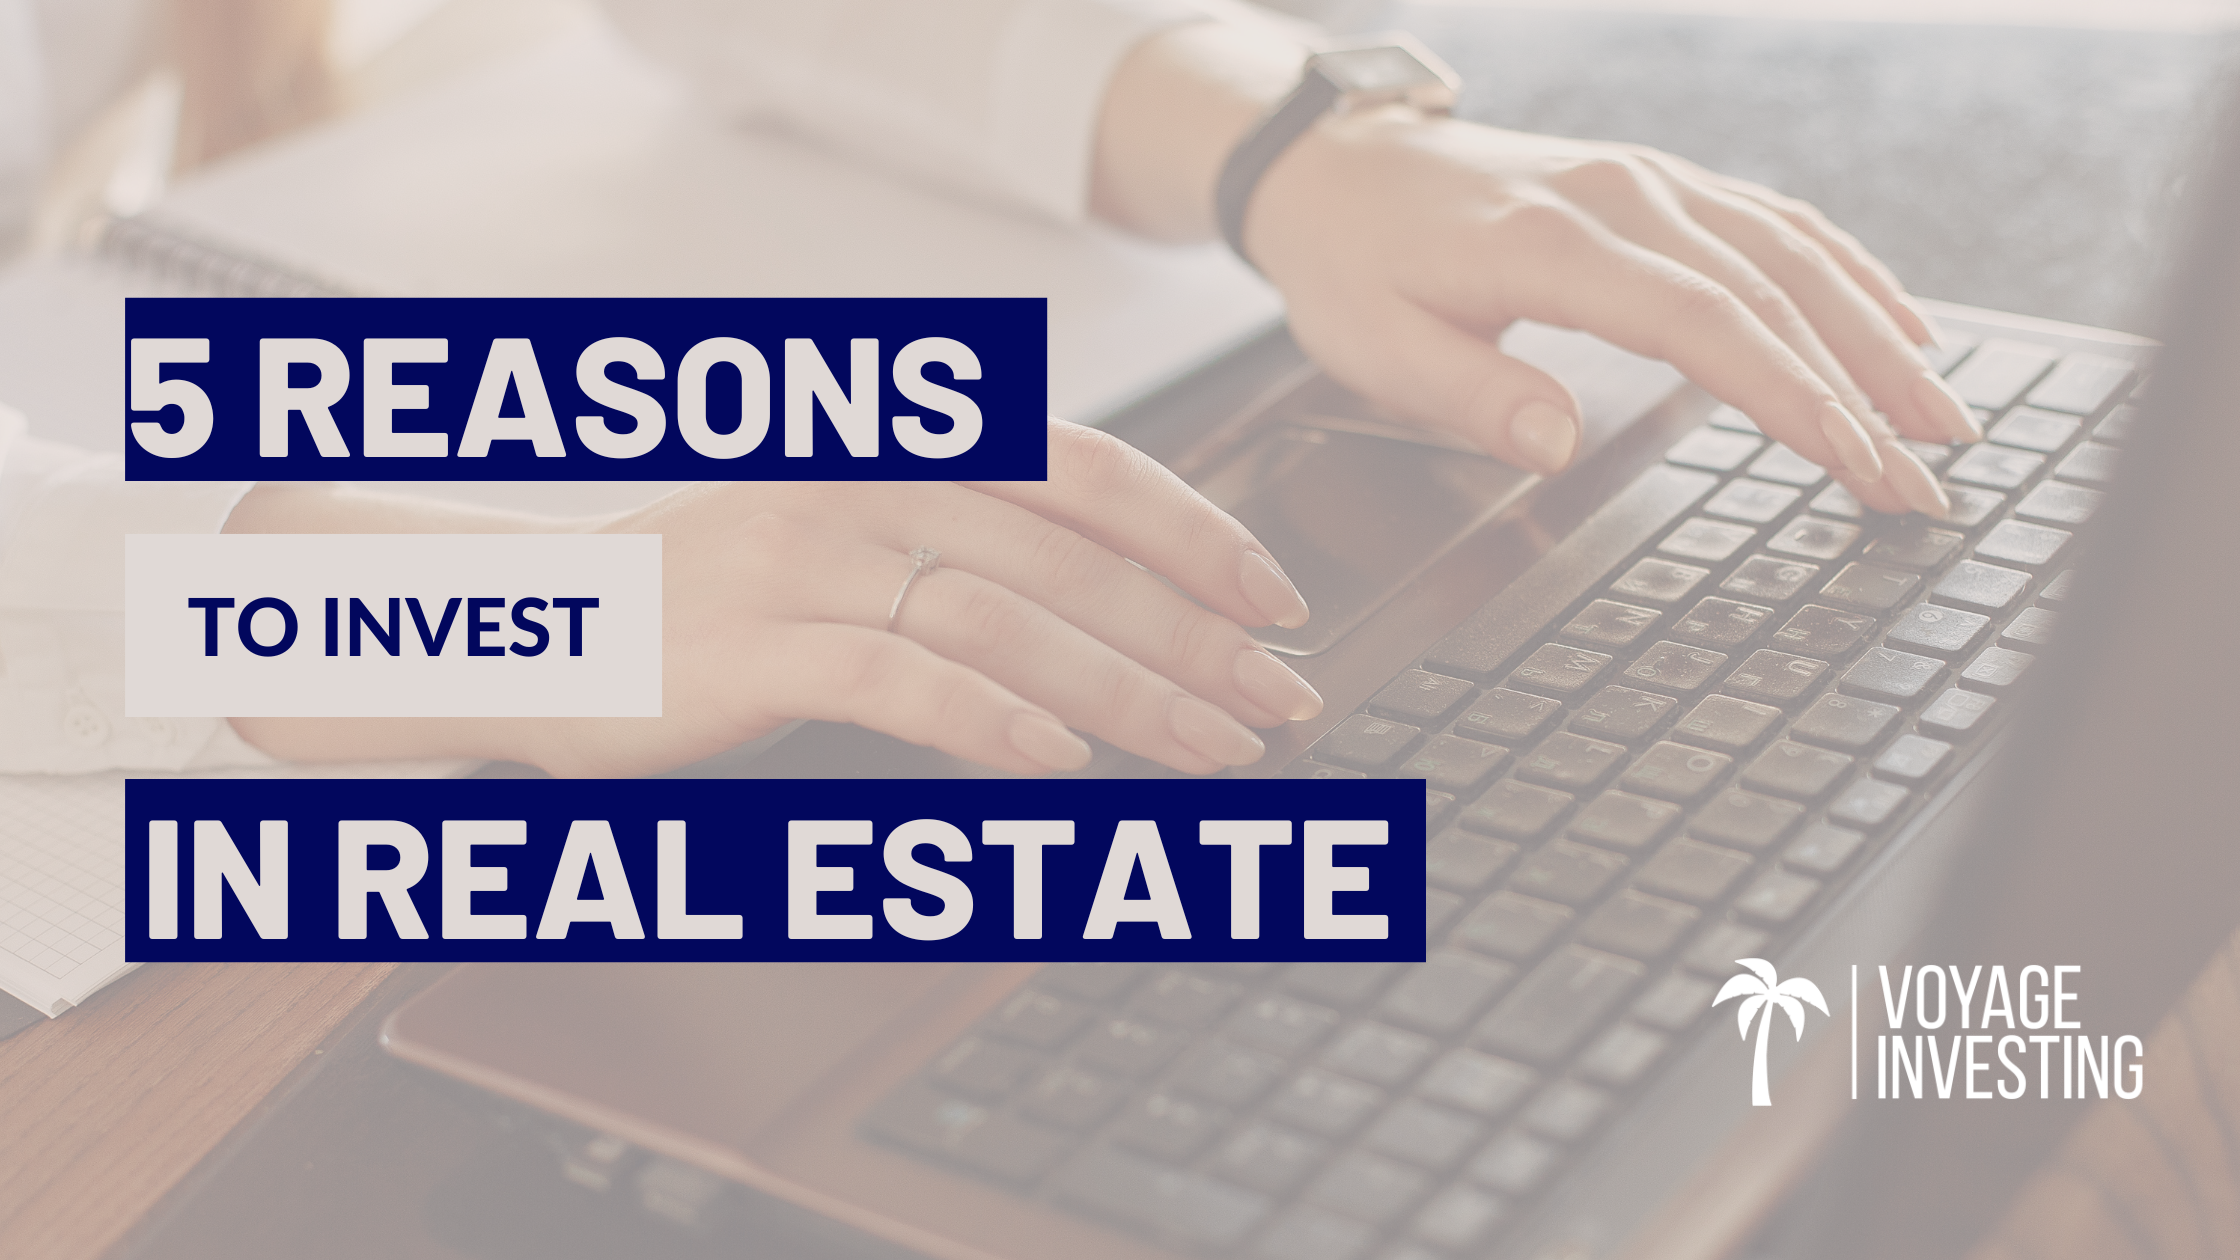 5 Reasons to Invest In Real Estate